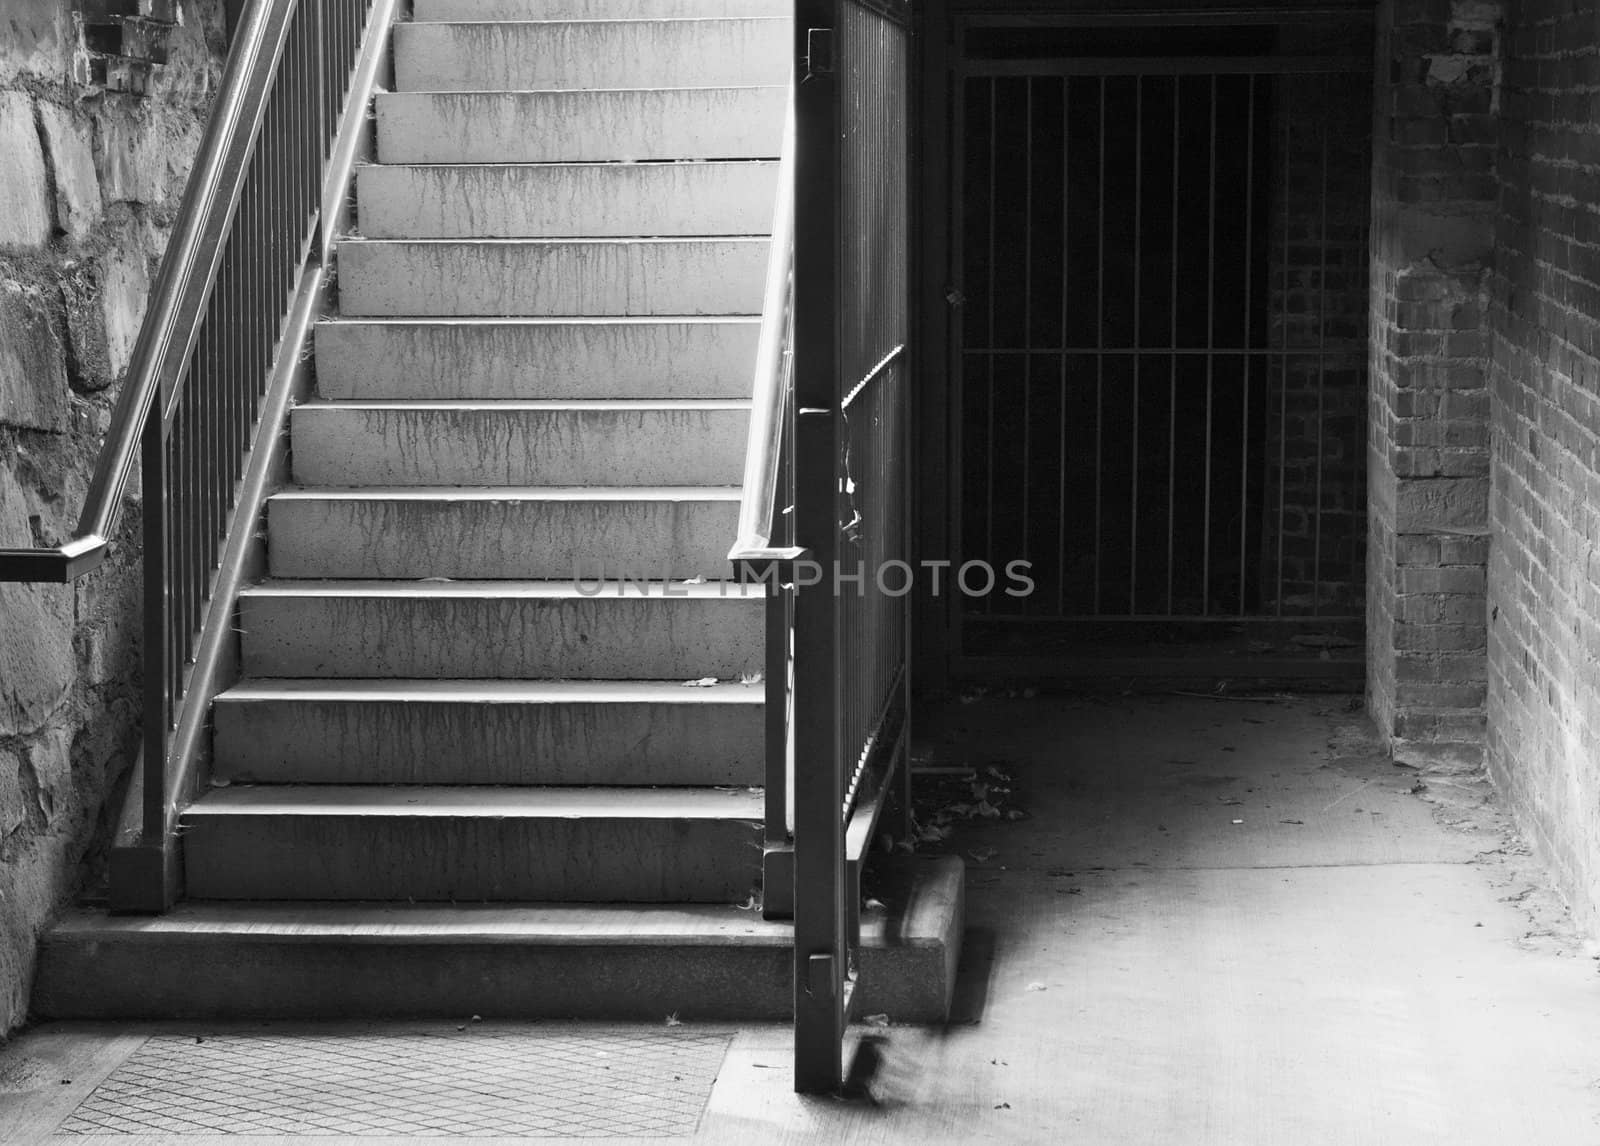 City Cellar Stairs leading down to stone and brick lower level in black and white